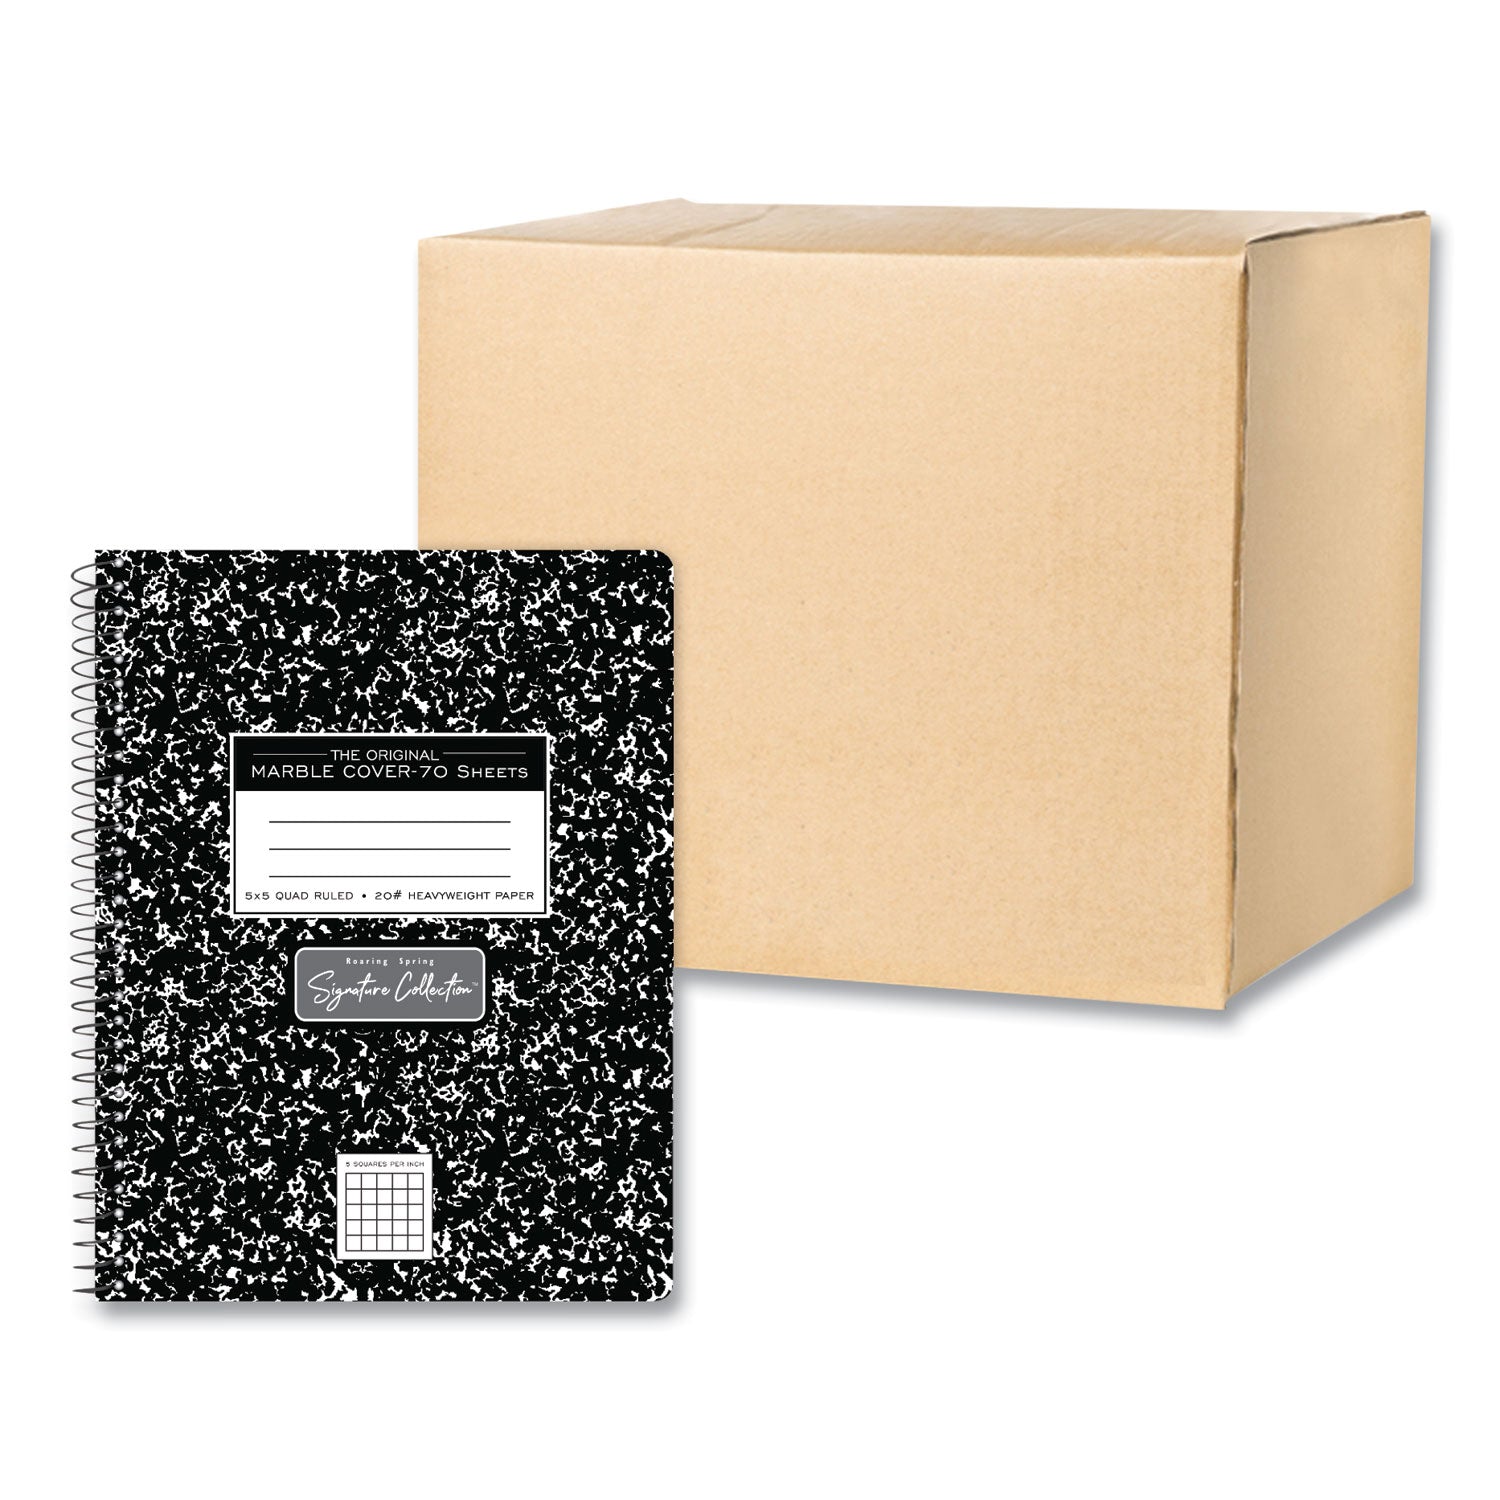 spring-signature-composition-book-quad-5-sq-in-rule-black-marble-cover-70-975-x-75-sheet-24-ct-ships-in-4-6-bus-days_roa10113cs - 2